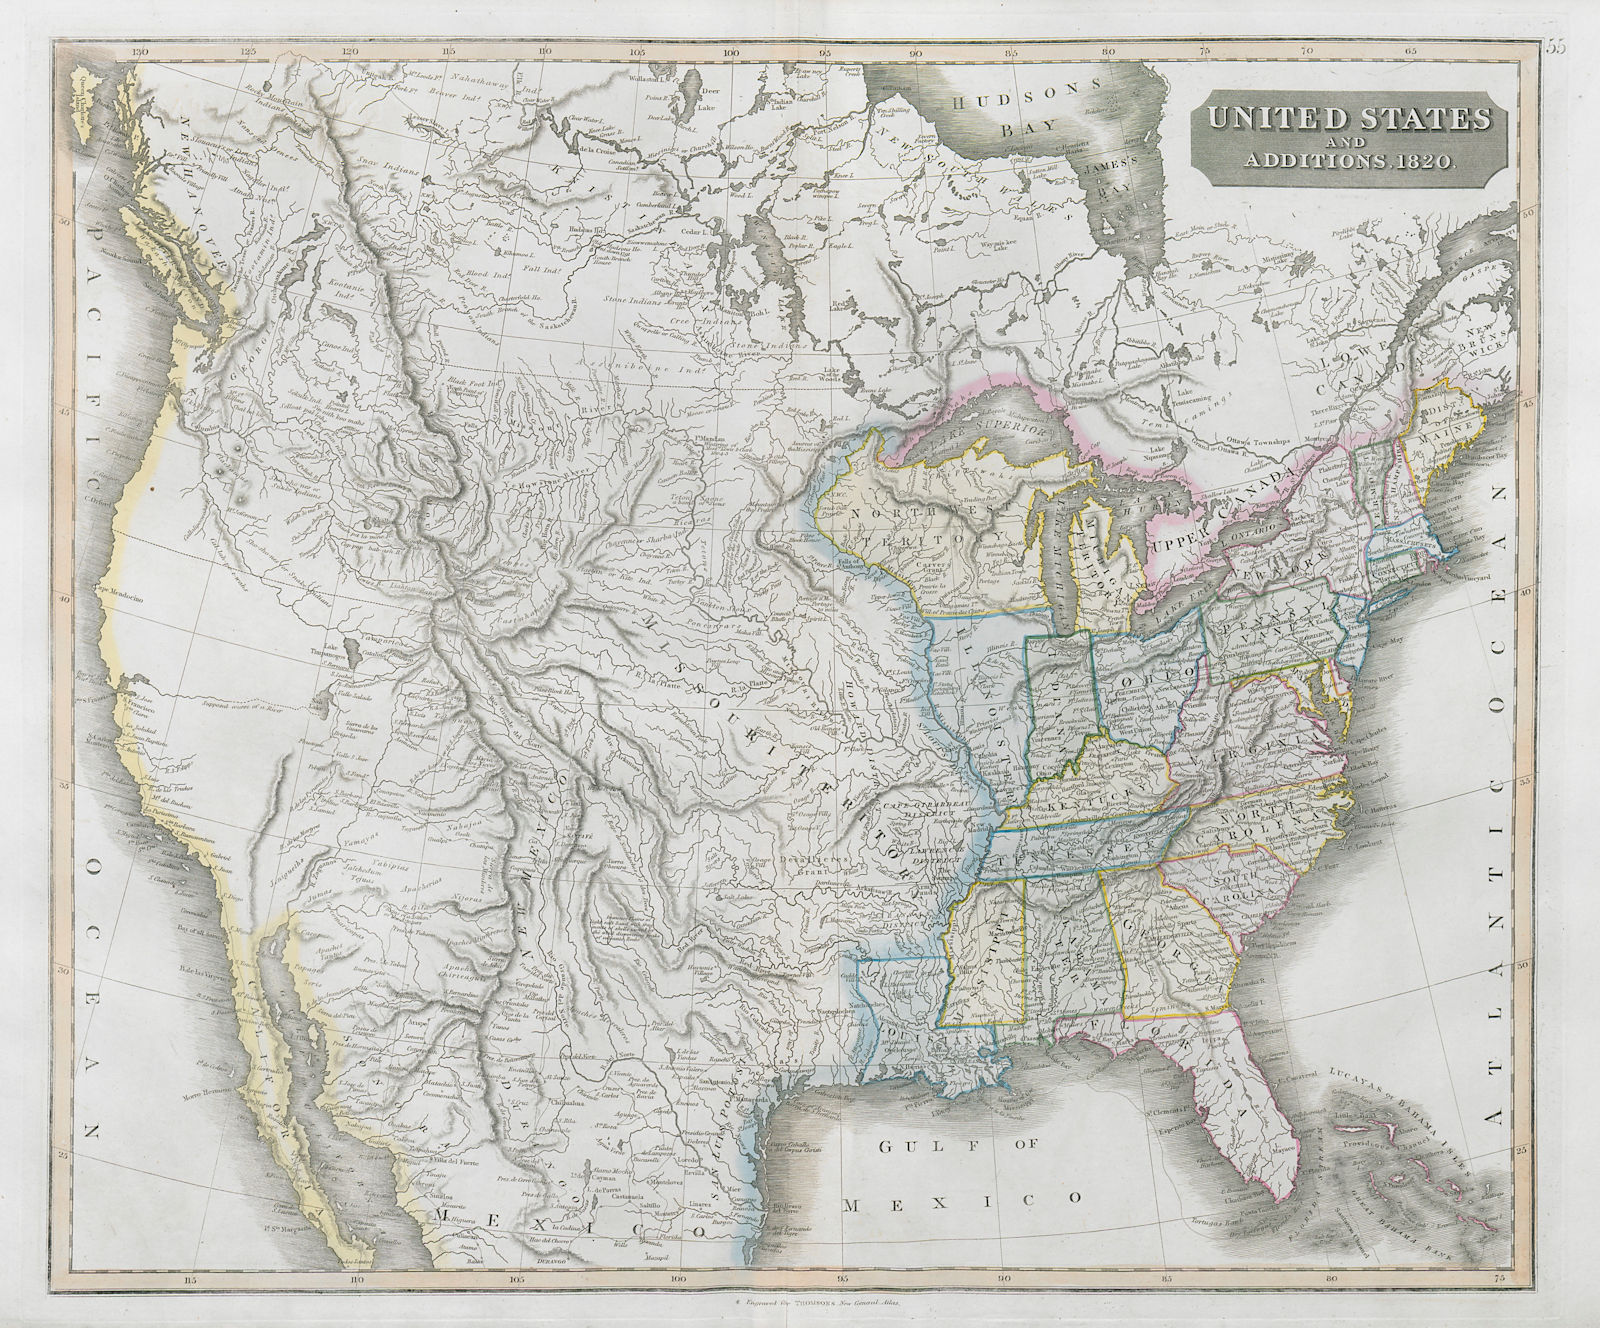 "United States & additions to 1820". 23 states. Indian villages THOMSON 1830 map